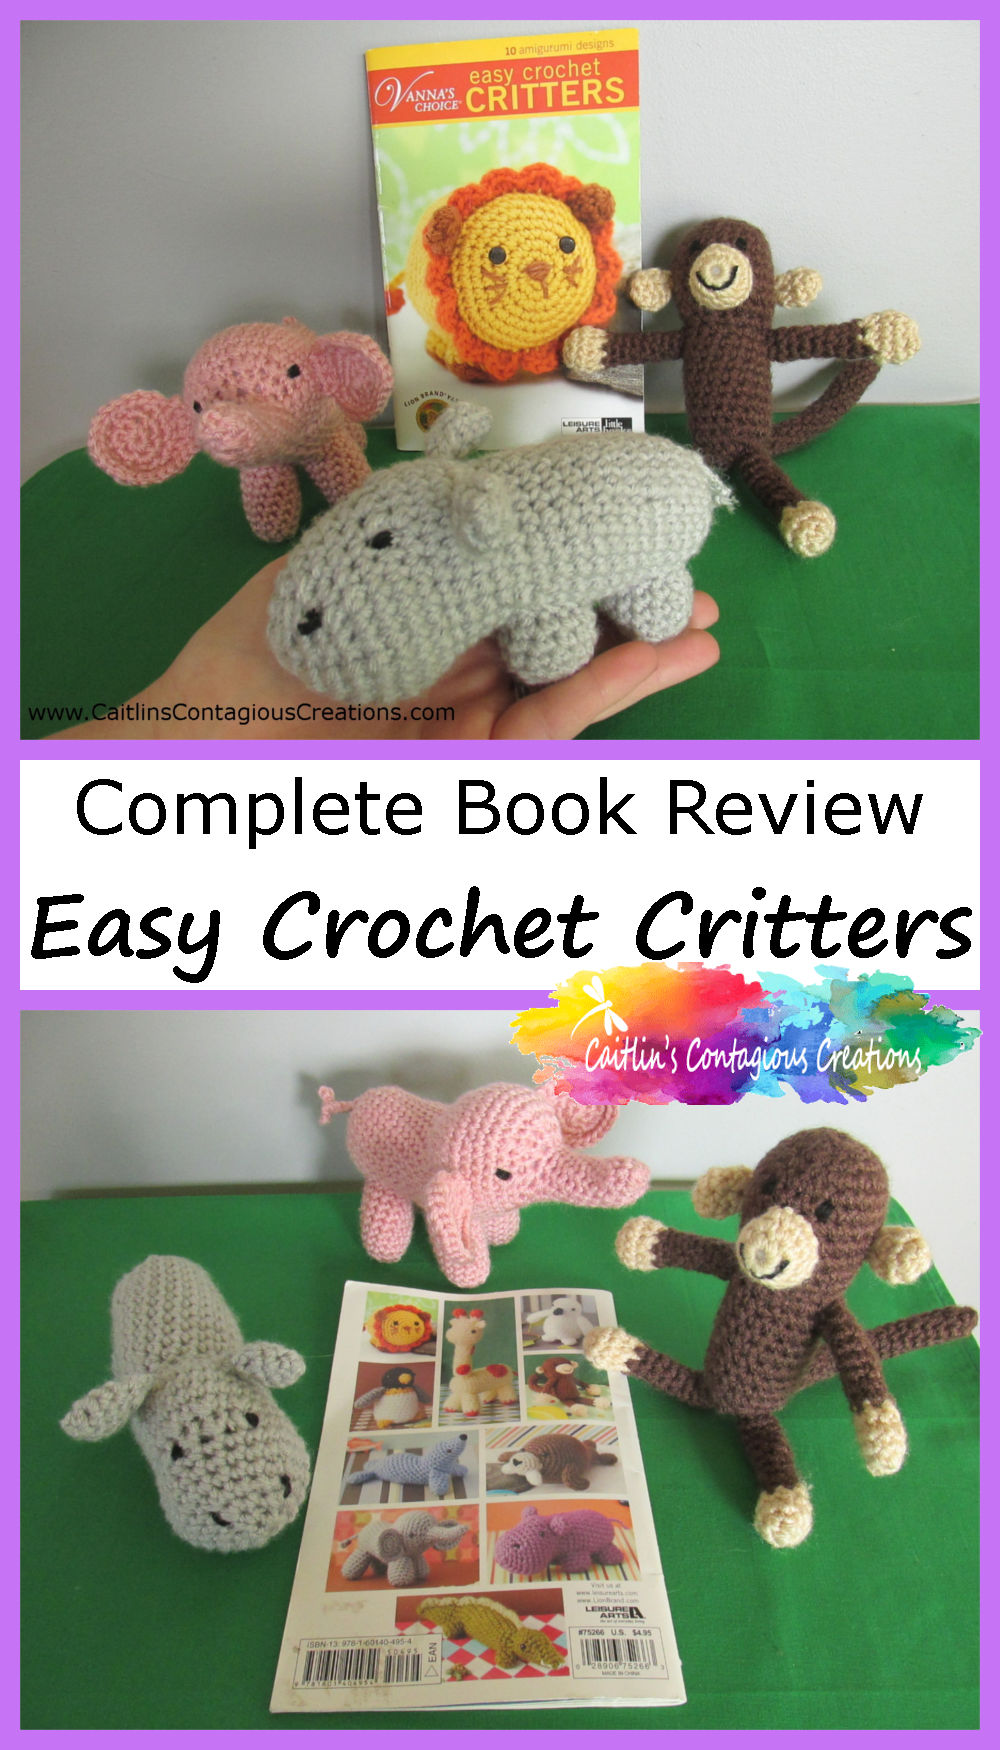 Anigurumi Crochet collection book covers with animal stuffed animals and text overlay